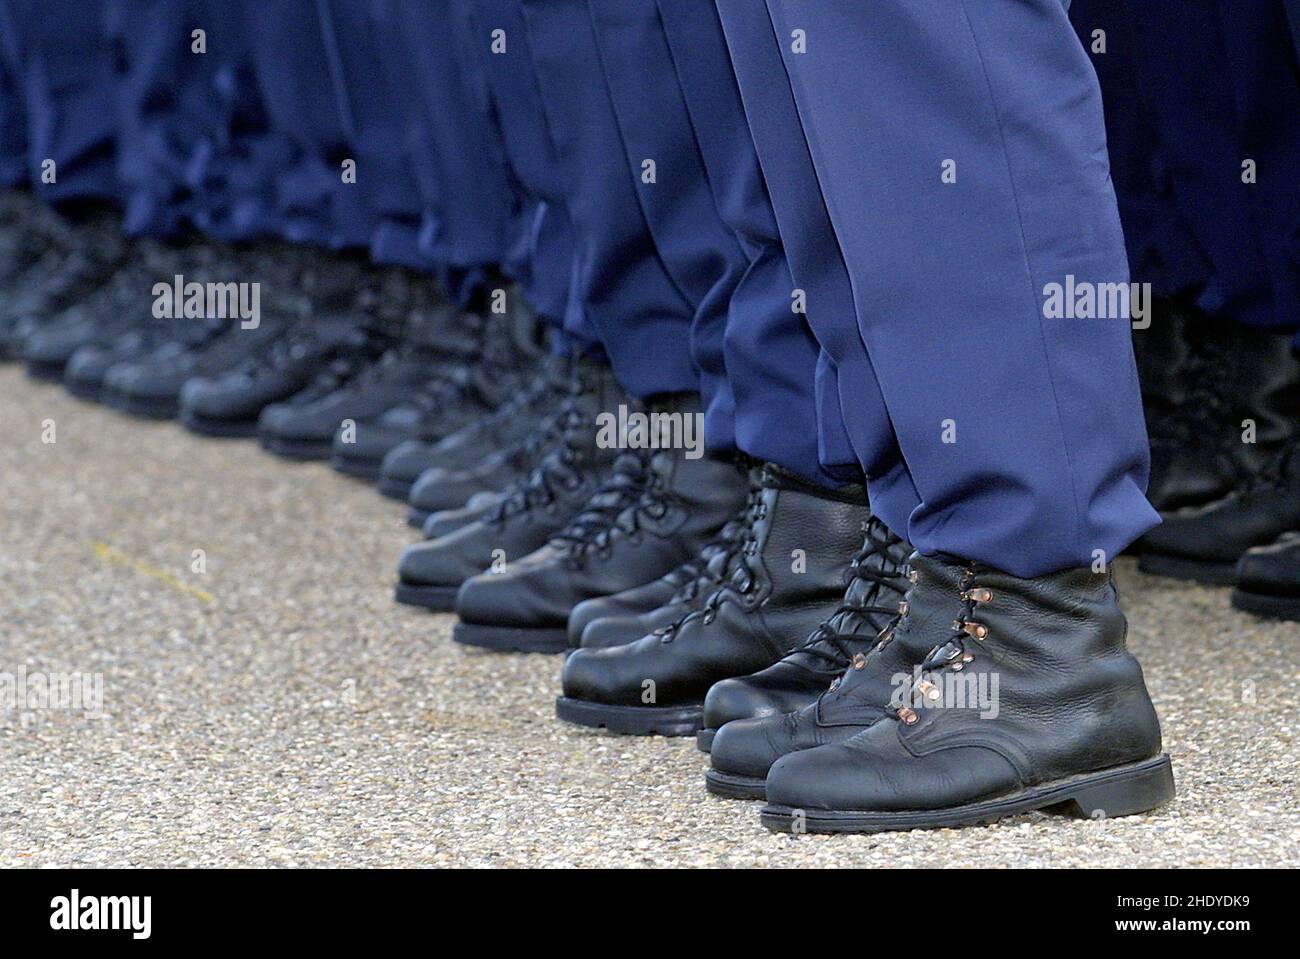 chaussures, militaires allemands, chaussures habillées, militaires allemands, troupes Banque D'Images